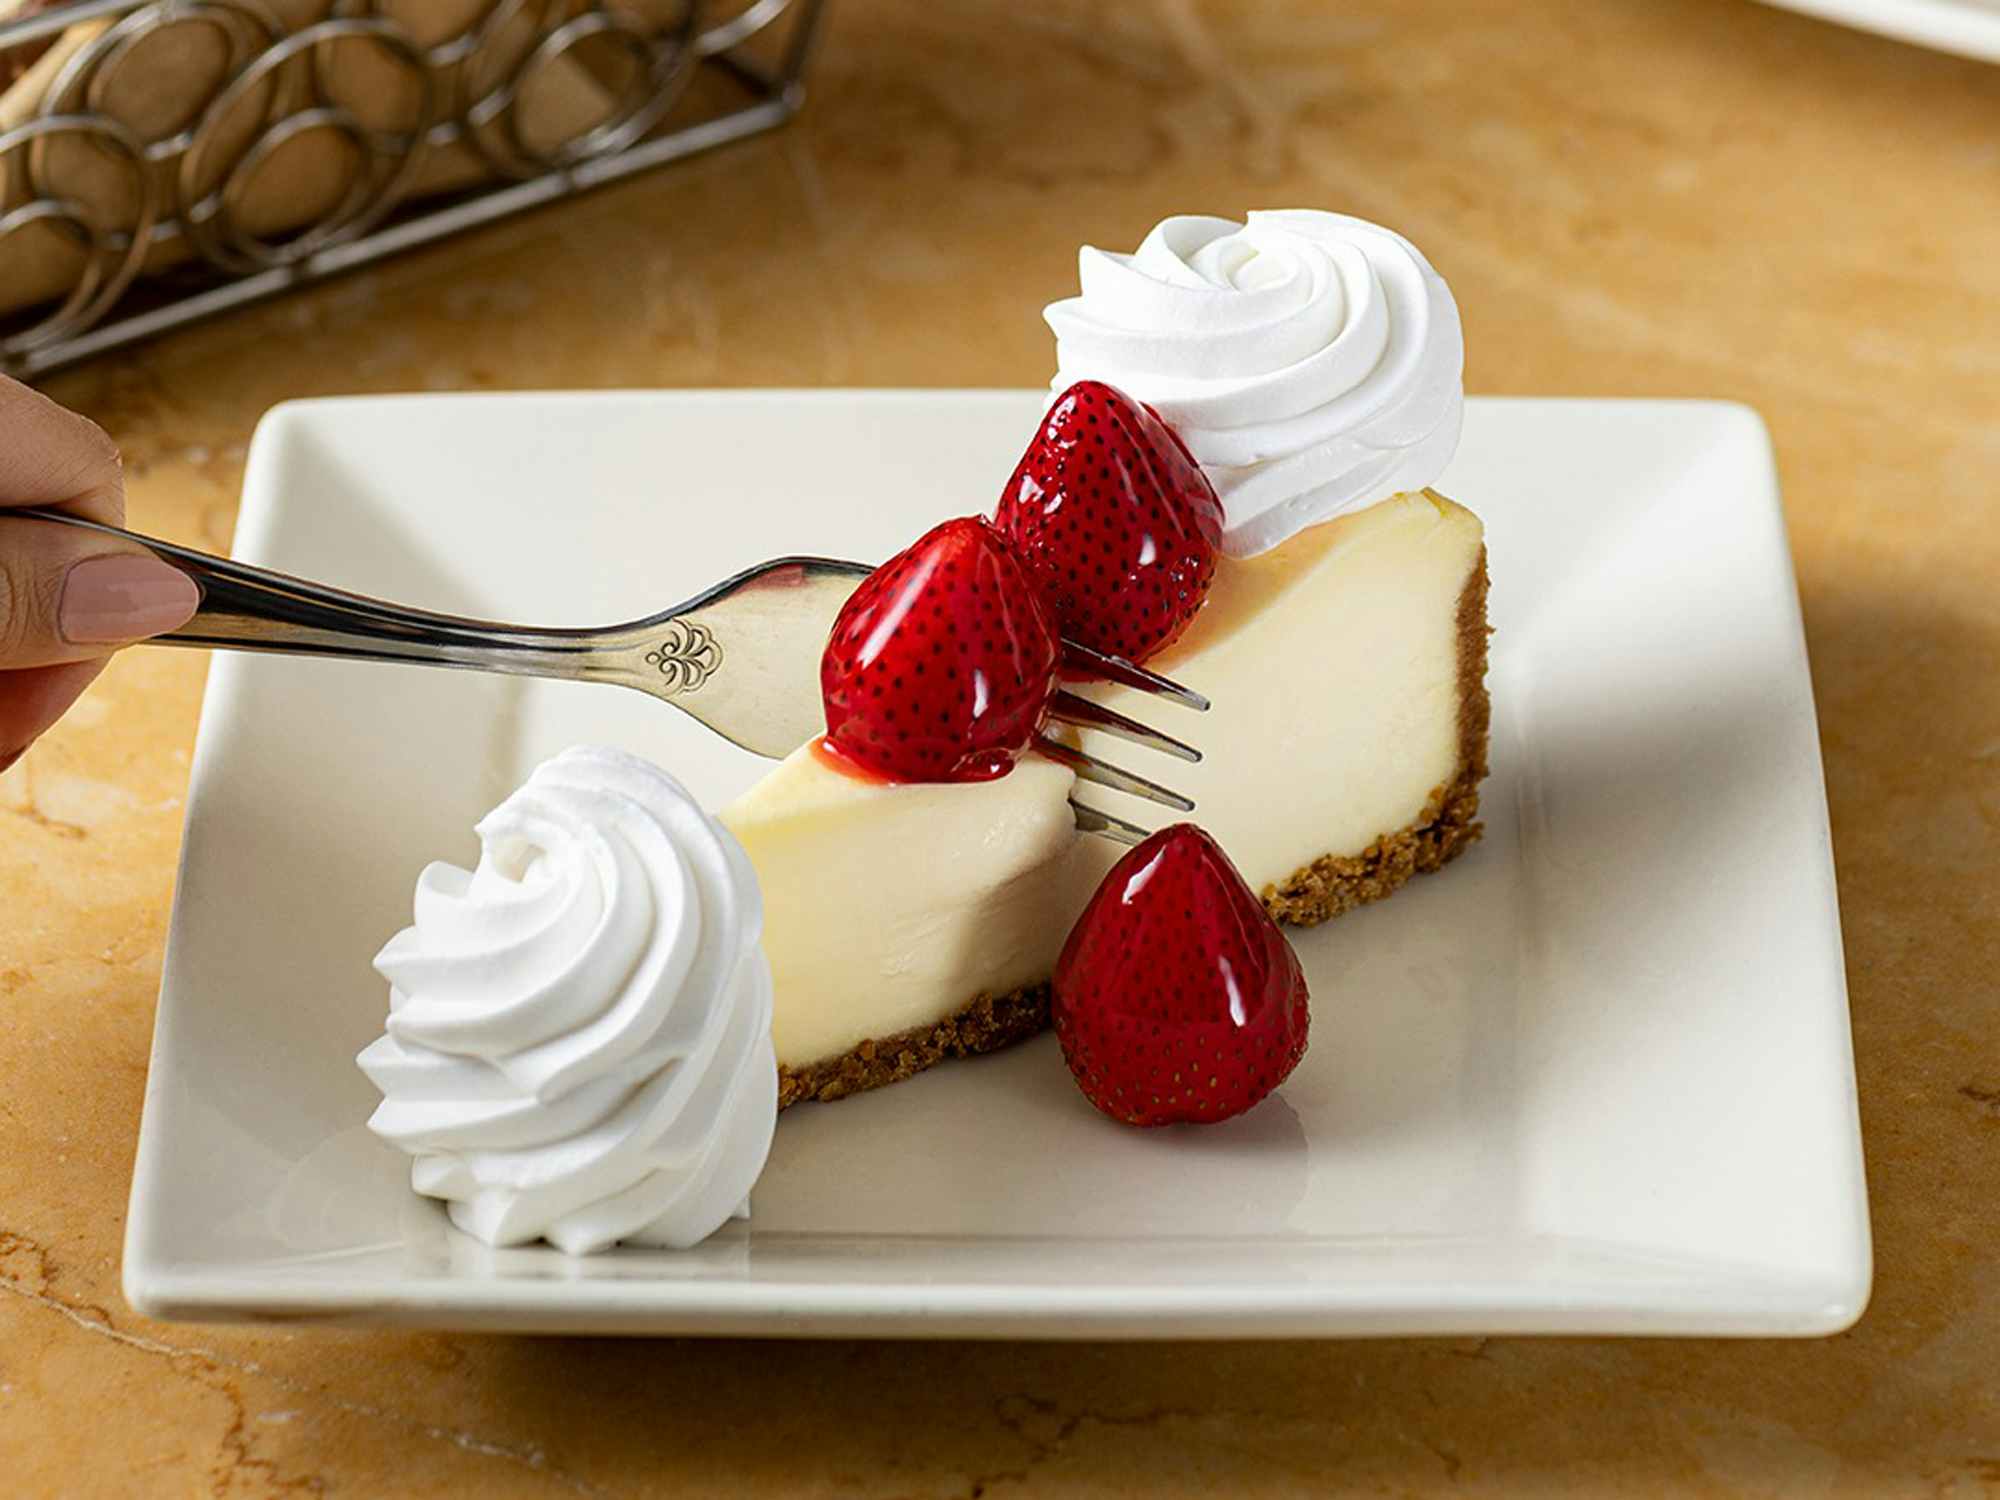 How To Get Free Cheesecake From Cheesecake Factory At Lenox